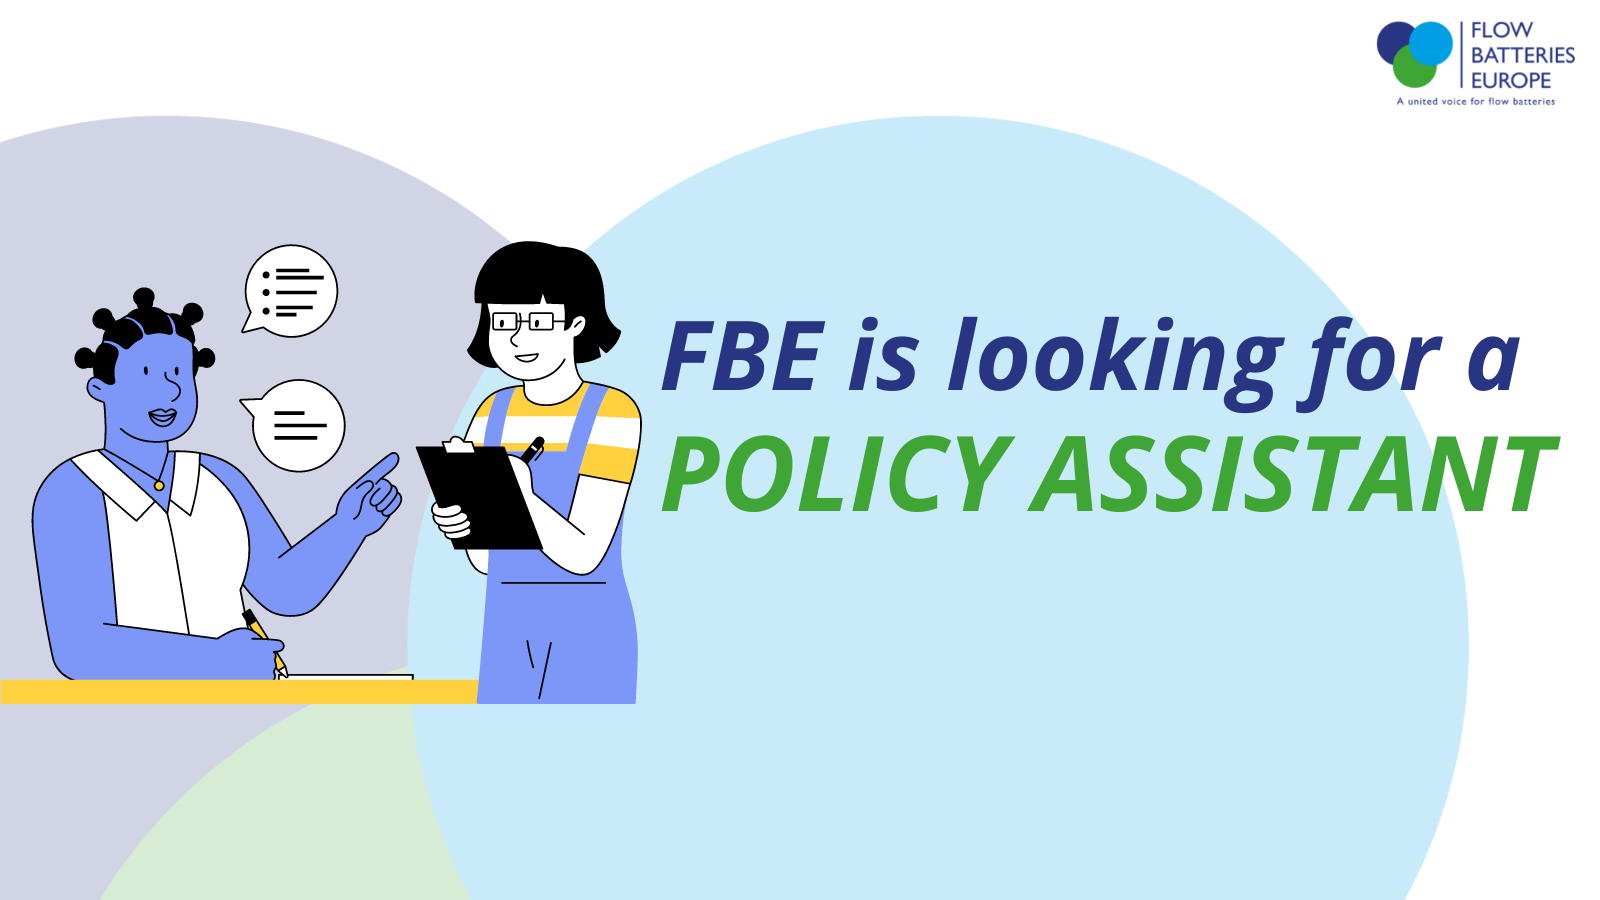 Join FBE team as Policy Assistant